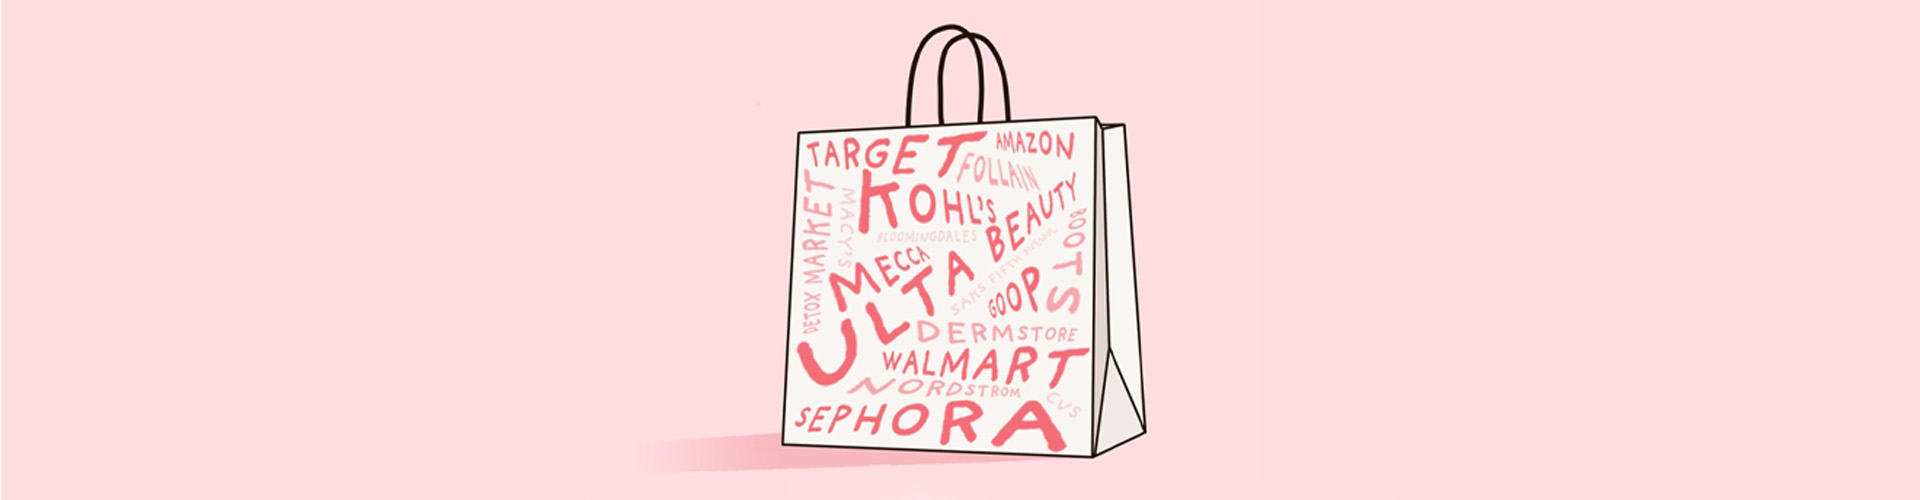 White shopping bag with several beauty brands and retailers names drawn over it - banner